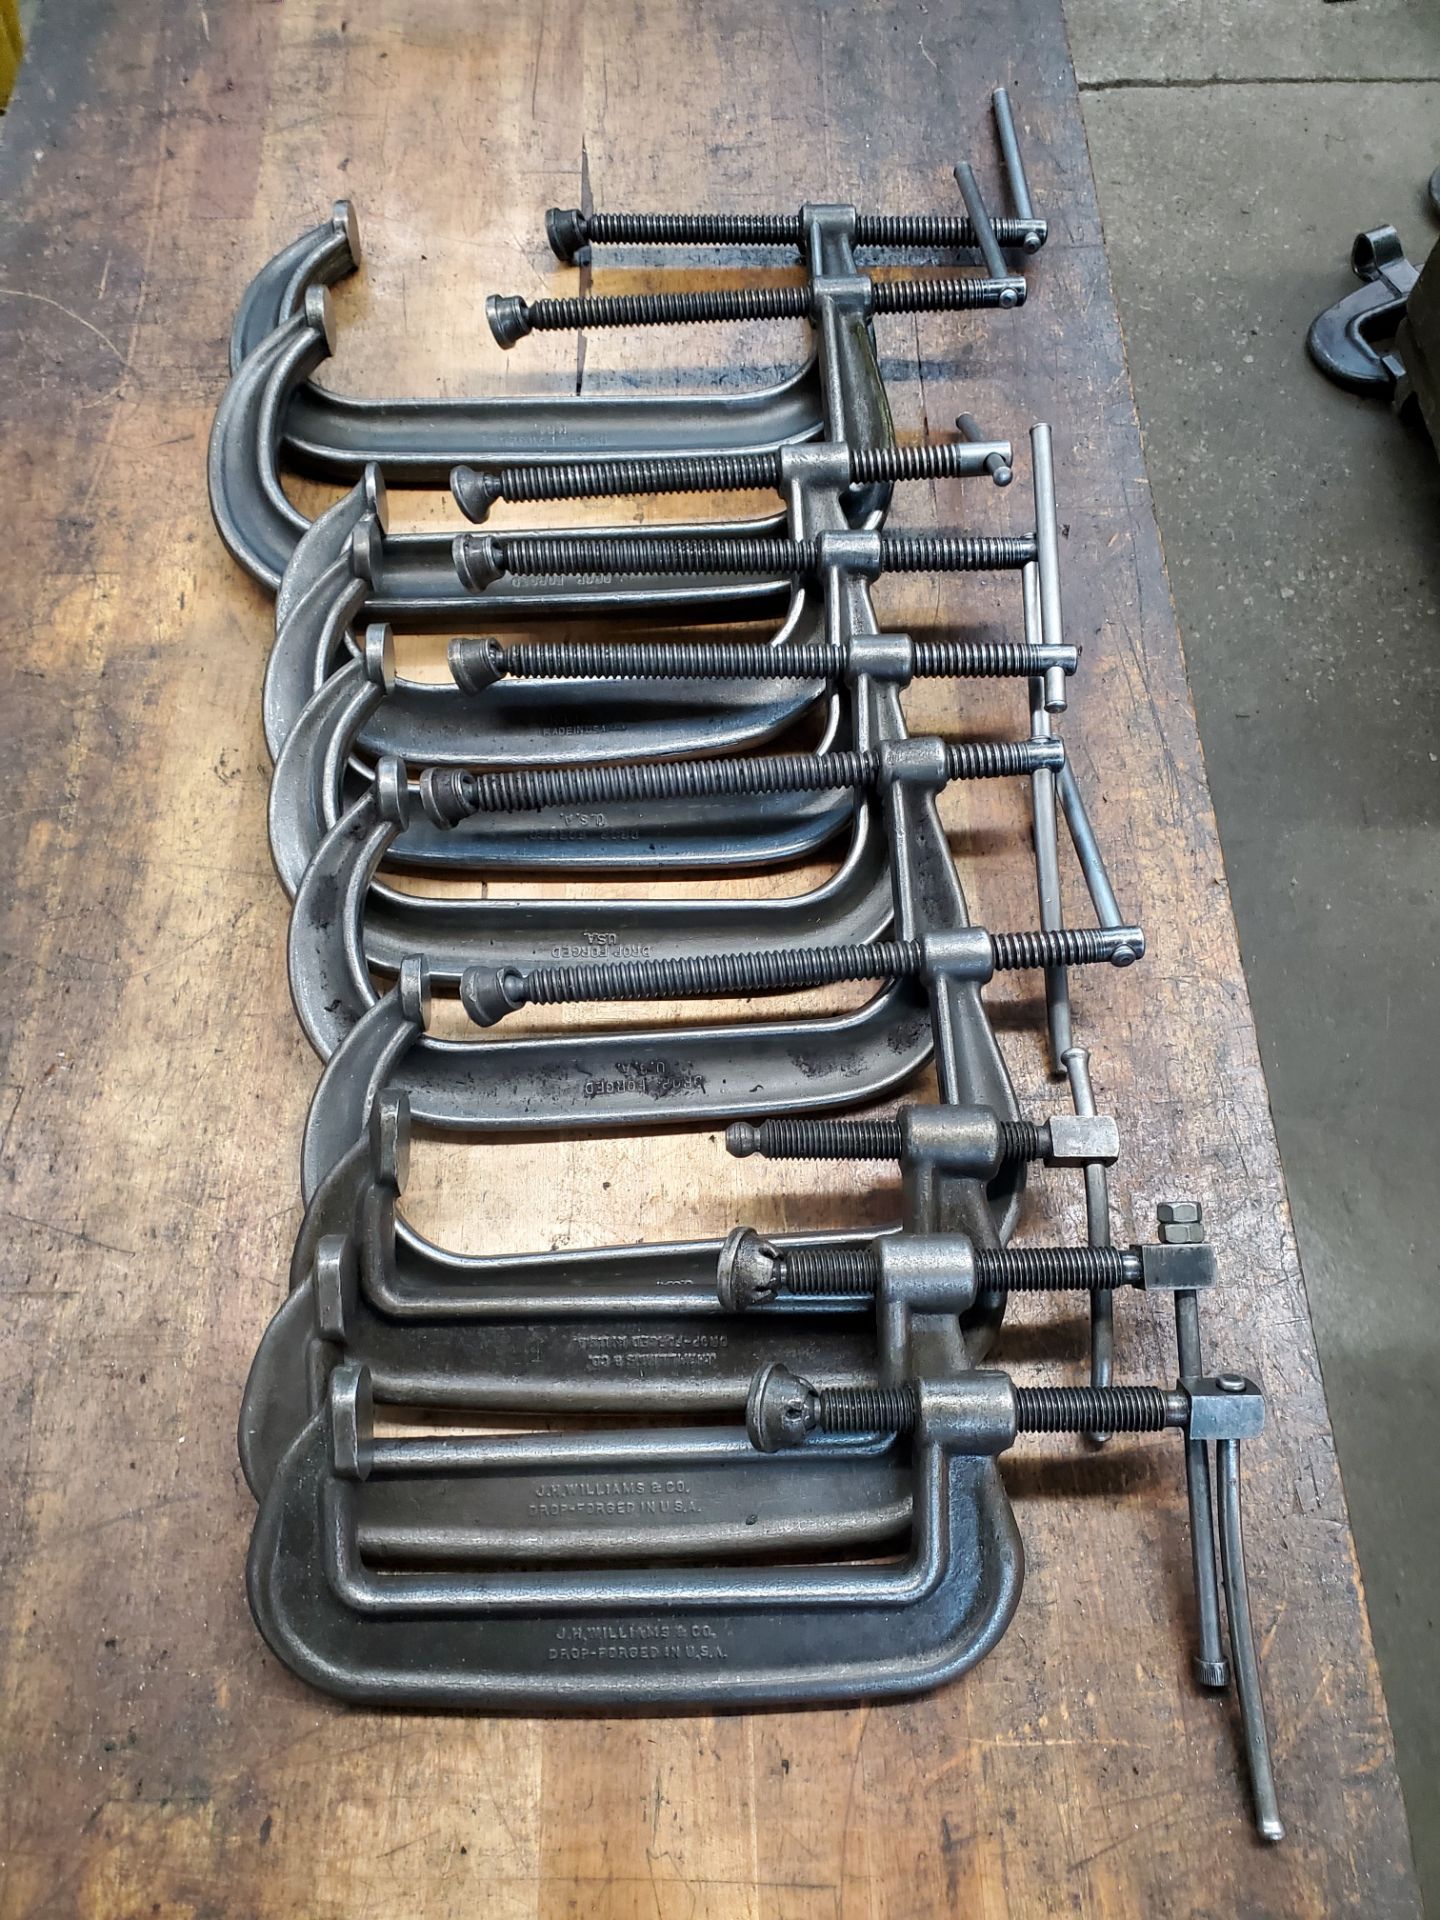 (10) Assorted C-Clamps